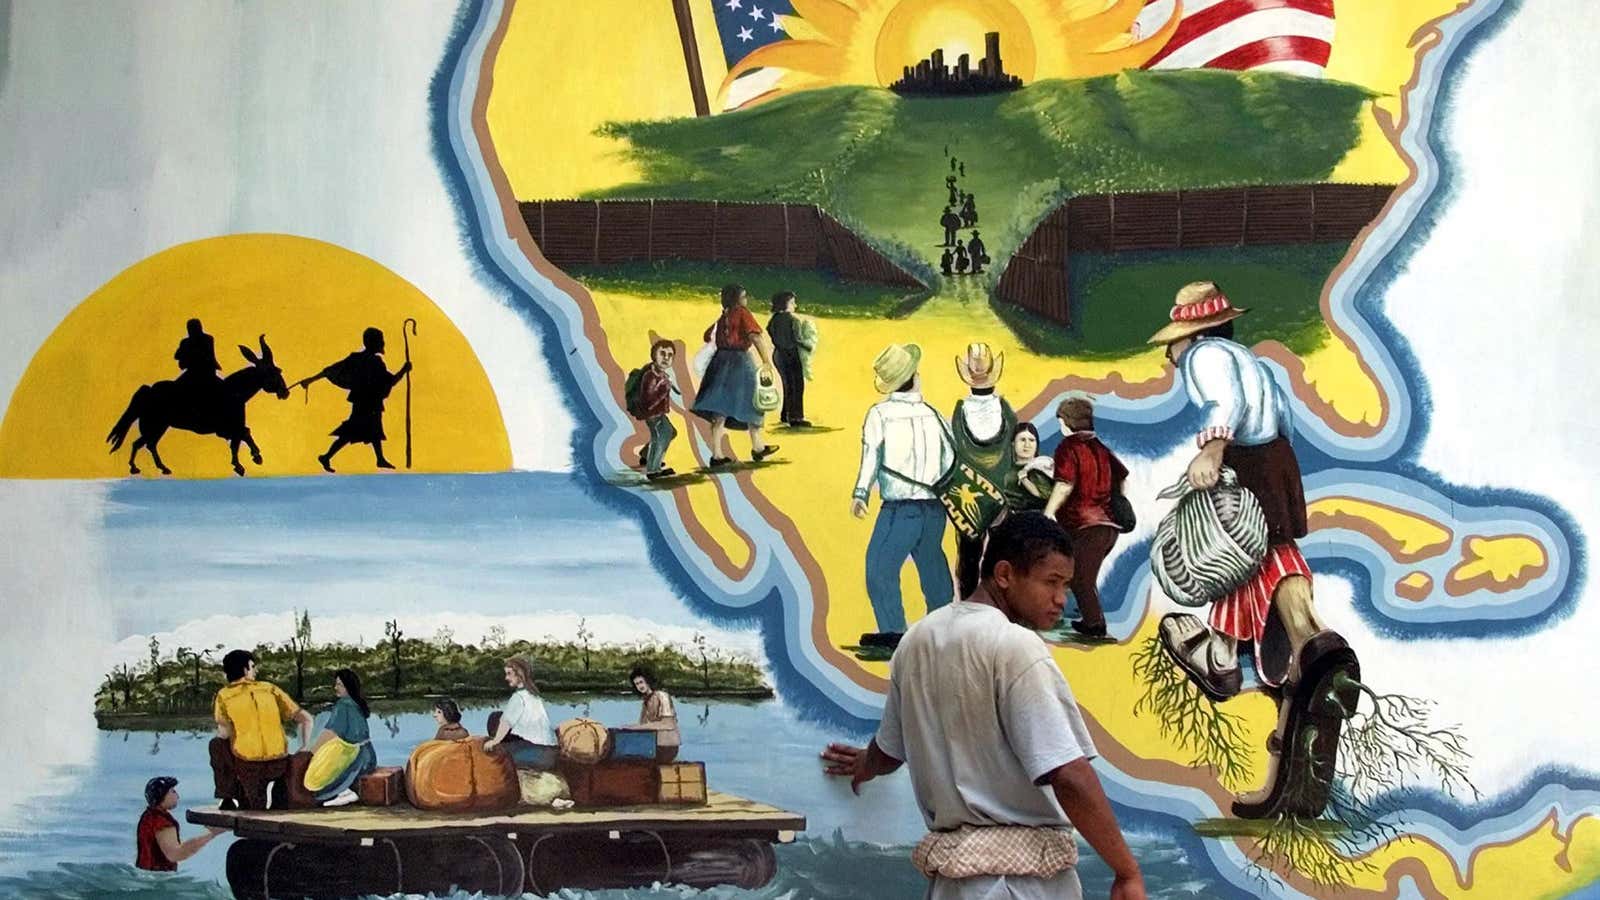 A Honduran migrant stands in front of a mural in the northwest Guatemalan border city of Tecun Uman on May 13, 2001.